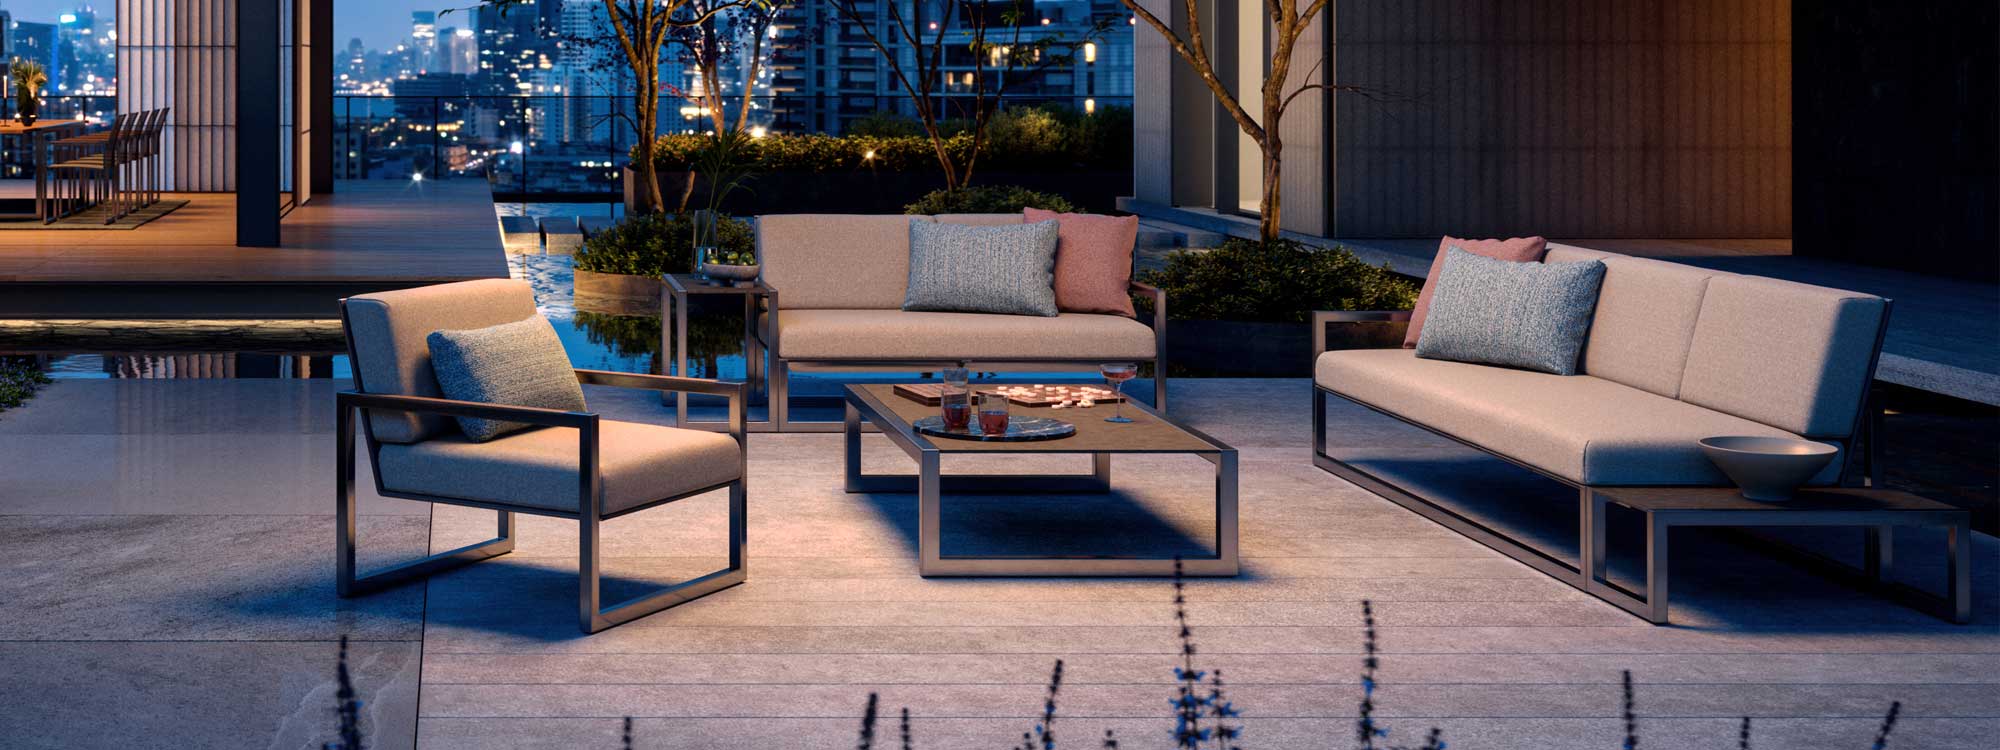 Nighttime image of Royal Botania Ninix Lounge 2 seat garden sofa, 3 seat garden sofa and lounge chairs on rooftop terrace, with city lights twinkling in the background